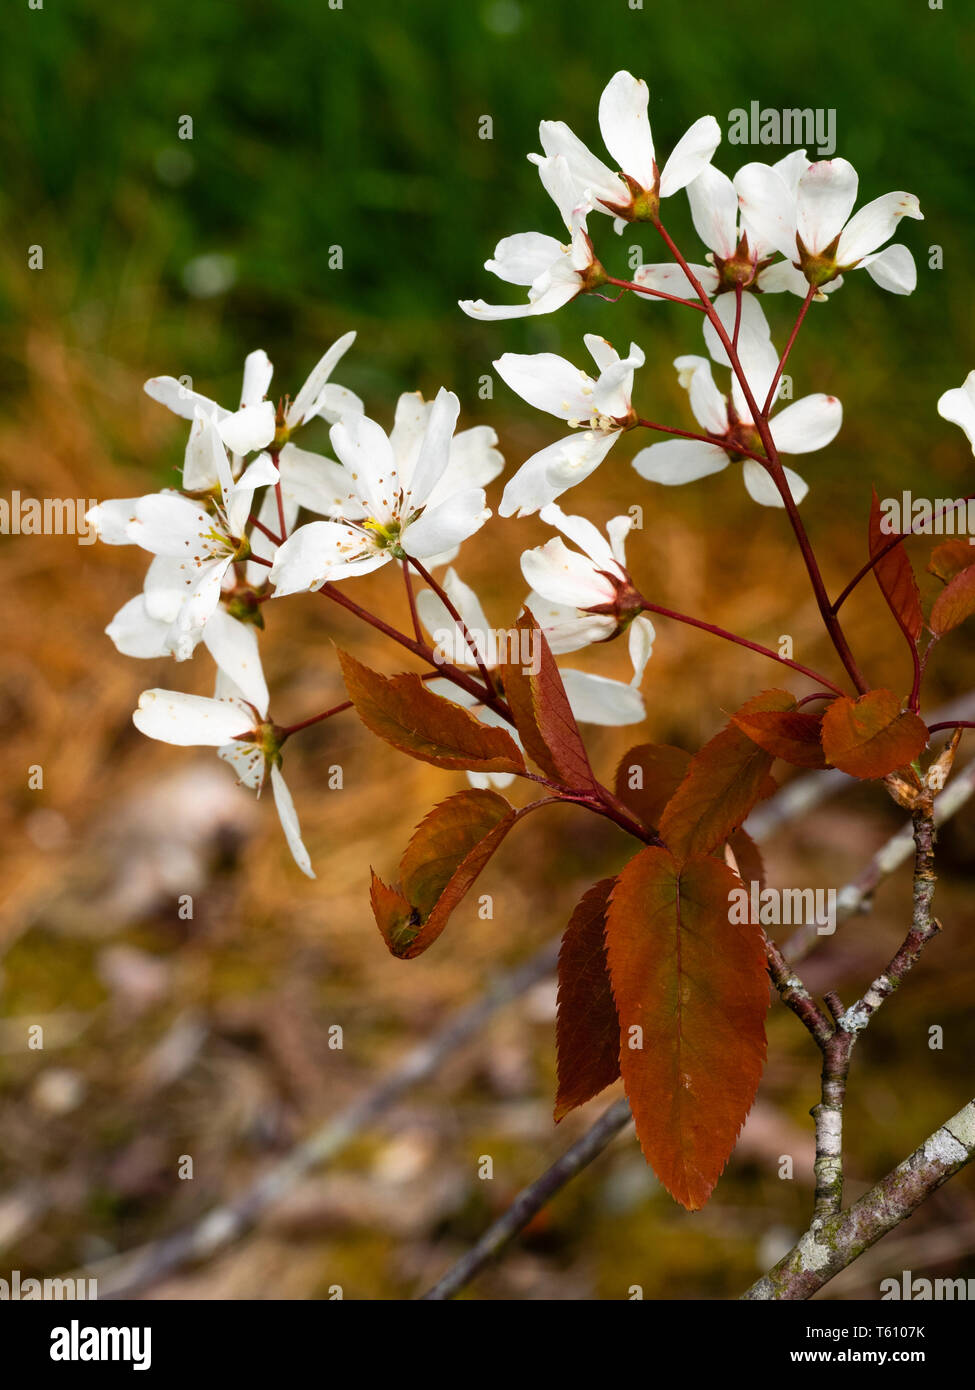 Pure white flowers of the snowy mesilpus, Amelanchier laevis 'Snowflakes', contrast with coppery young foliage in their spring display Stock Photo